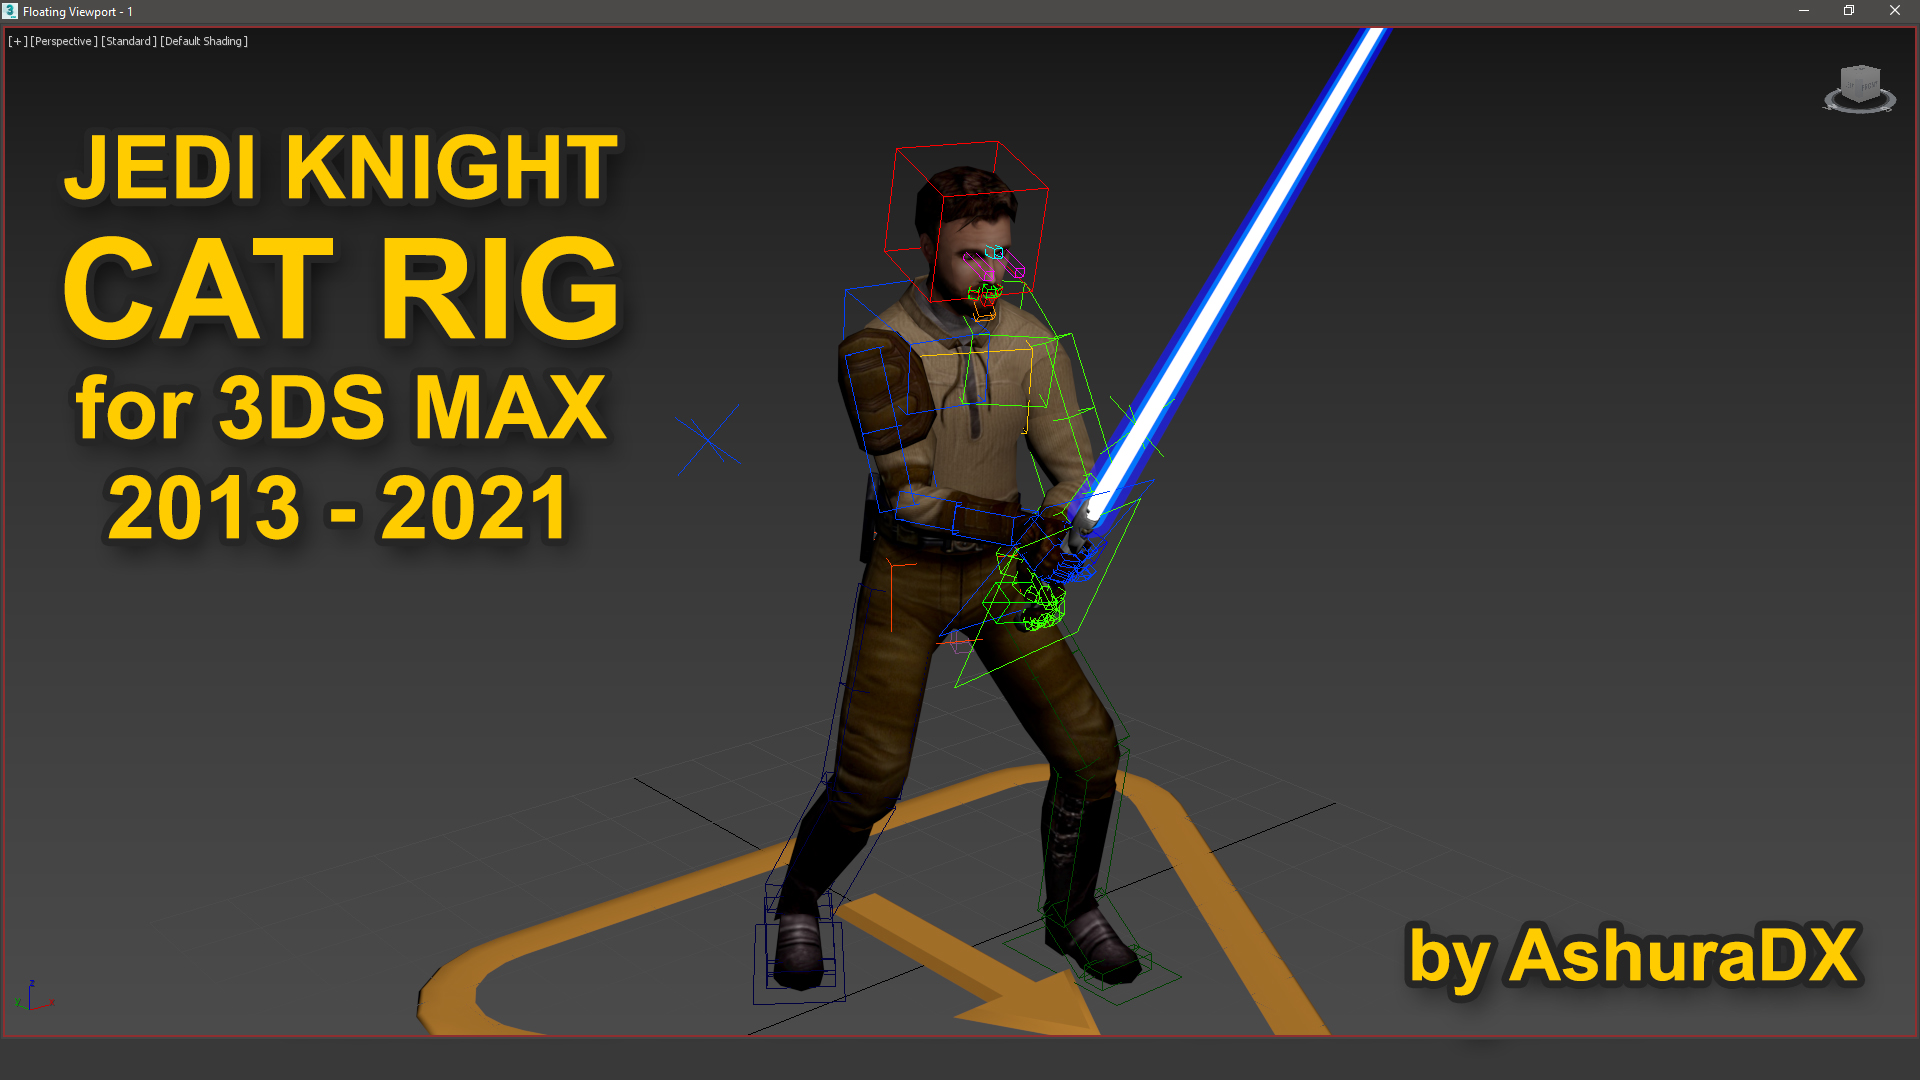 More information about "Jedi Knight CAT Rig for 3ds Max 2013+"